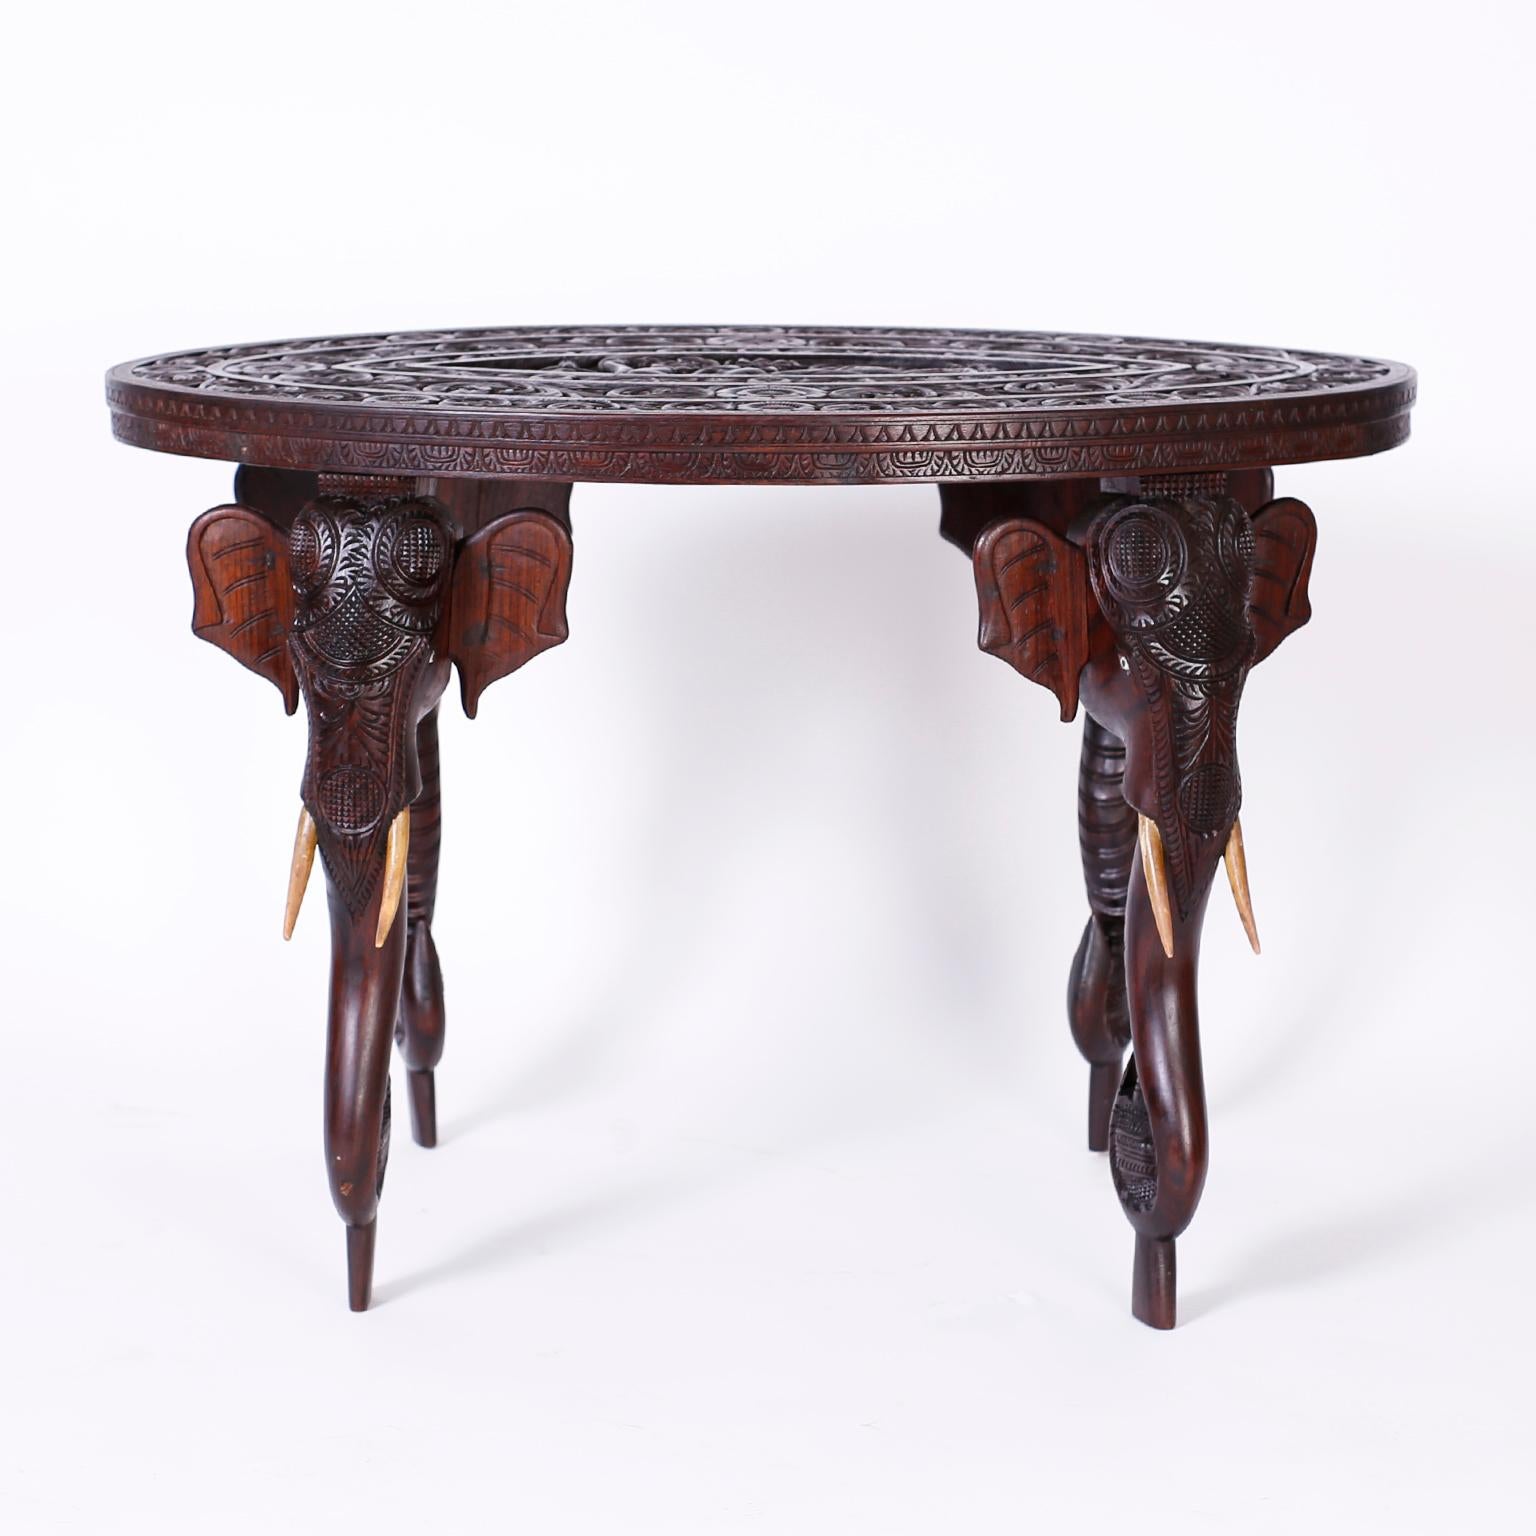 Antique Thai table crafted in indigenous mahogany with an elaborately carved oval top with a goddess in the center panel inside three layers of floral designs. The four legs are carved elephant heads with wood tusks and stylized feet.